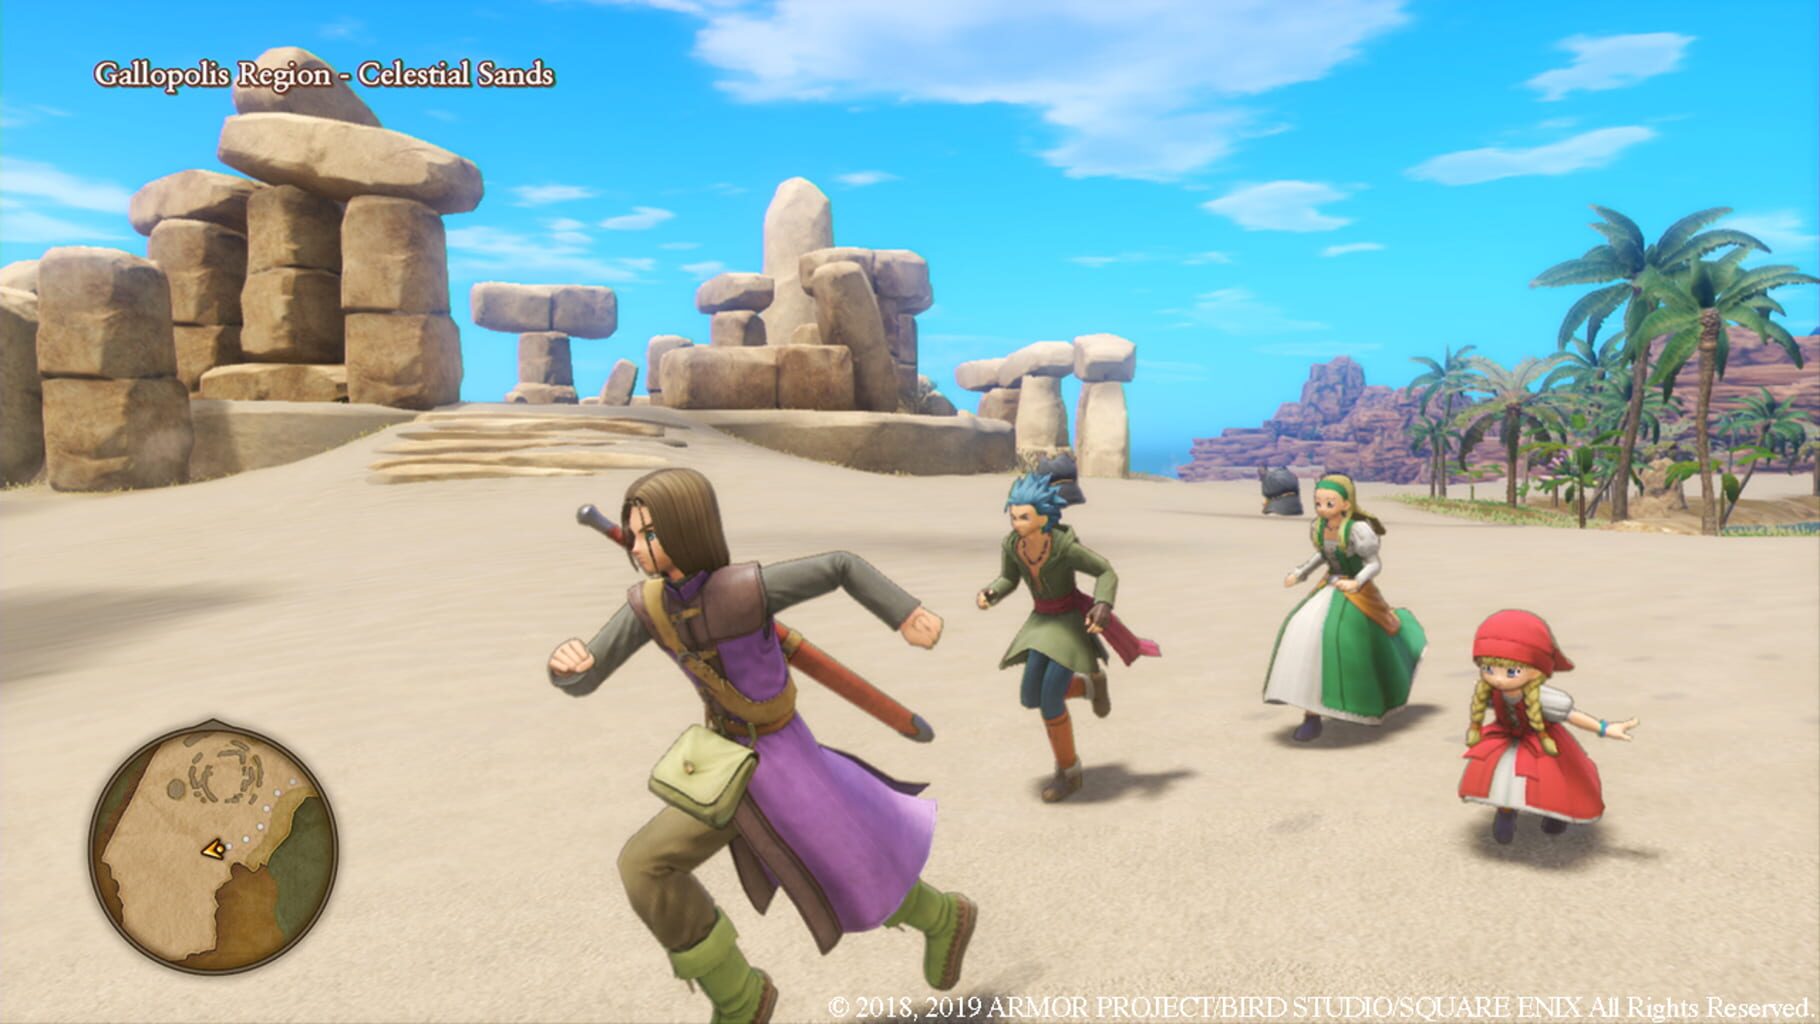 Dragon Quest XI S: Echoes of an Elusive Age screenshots